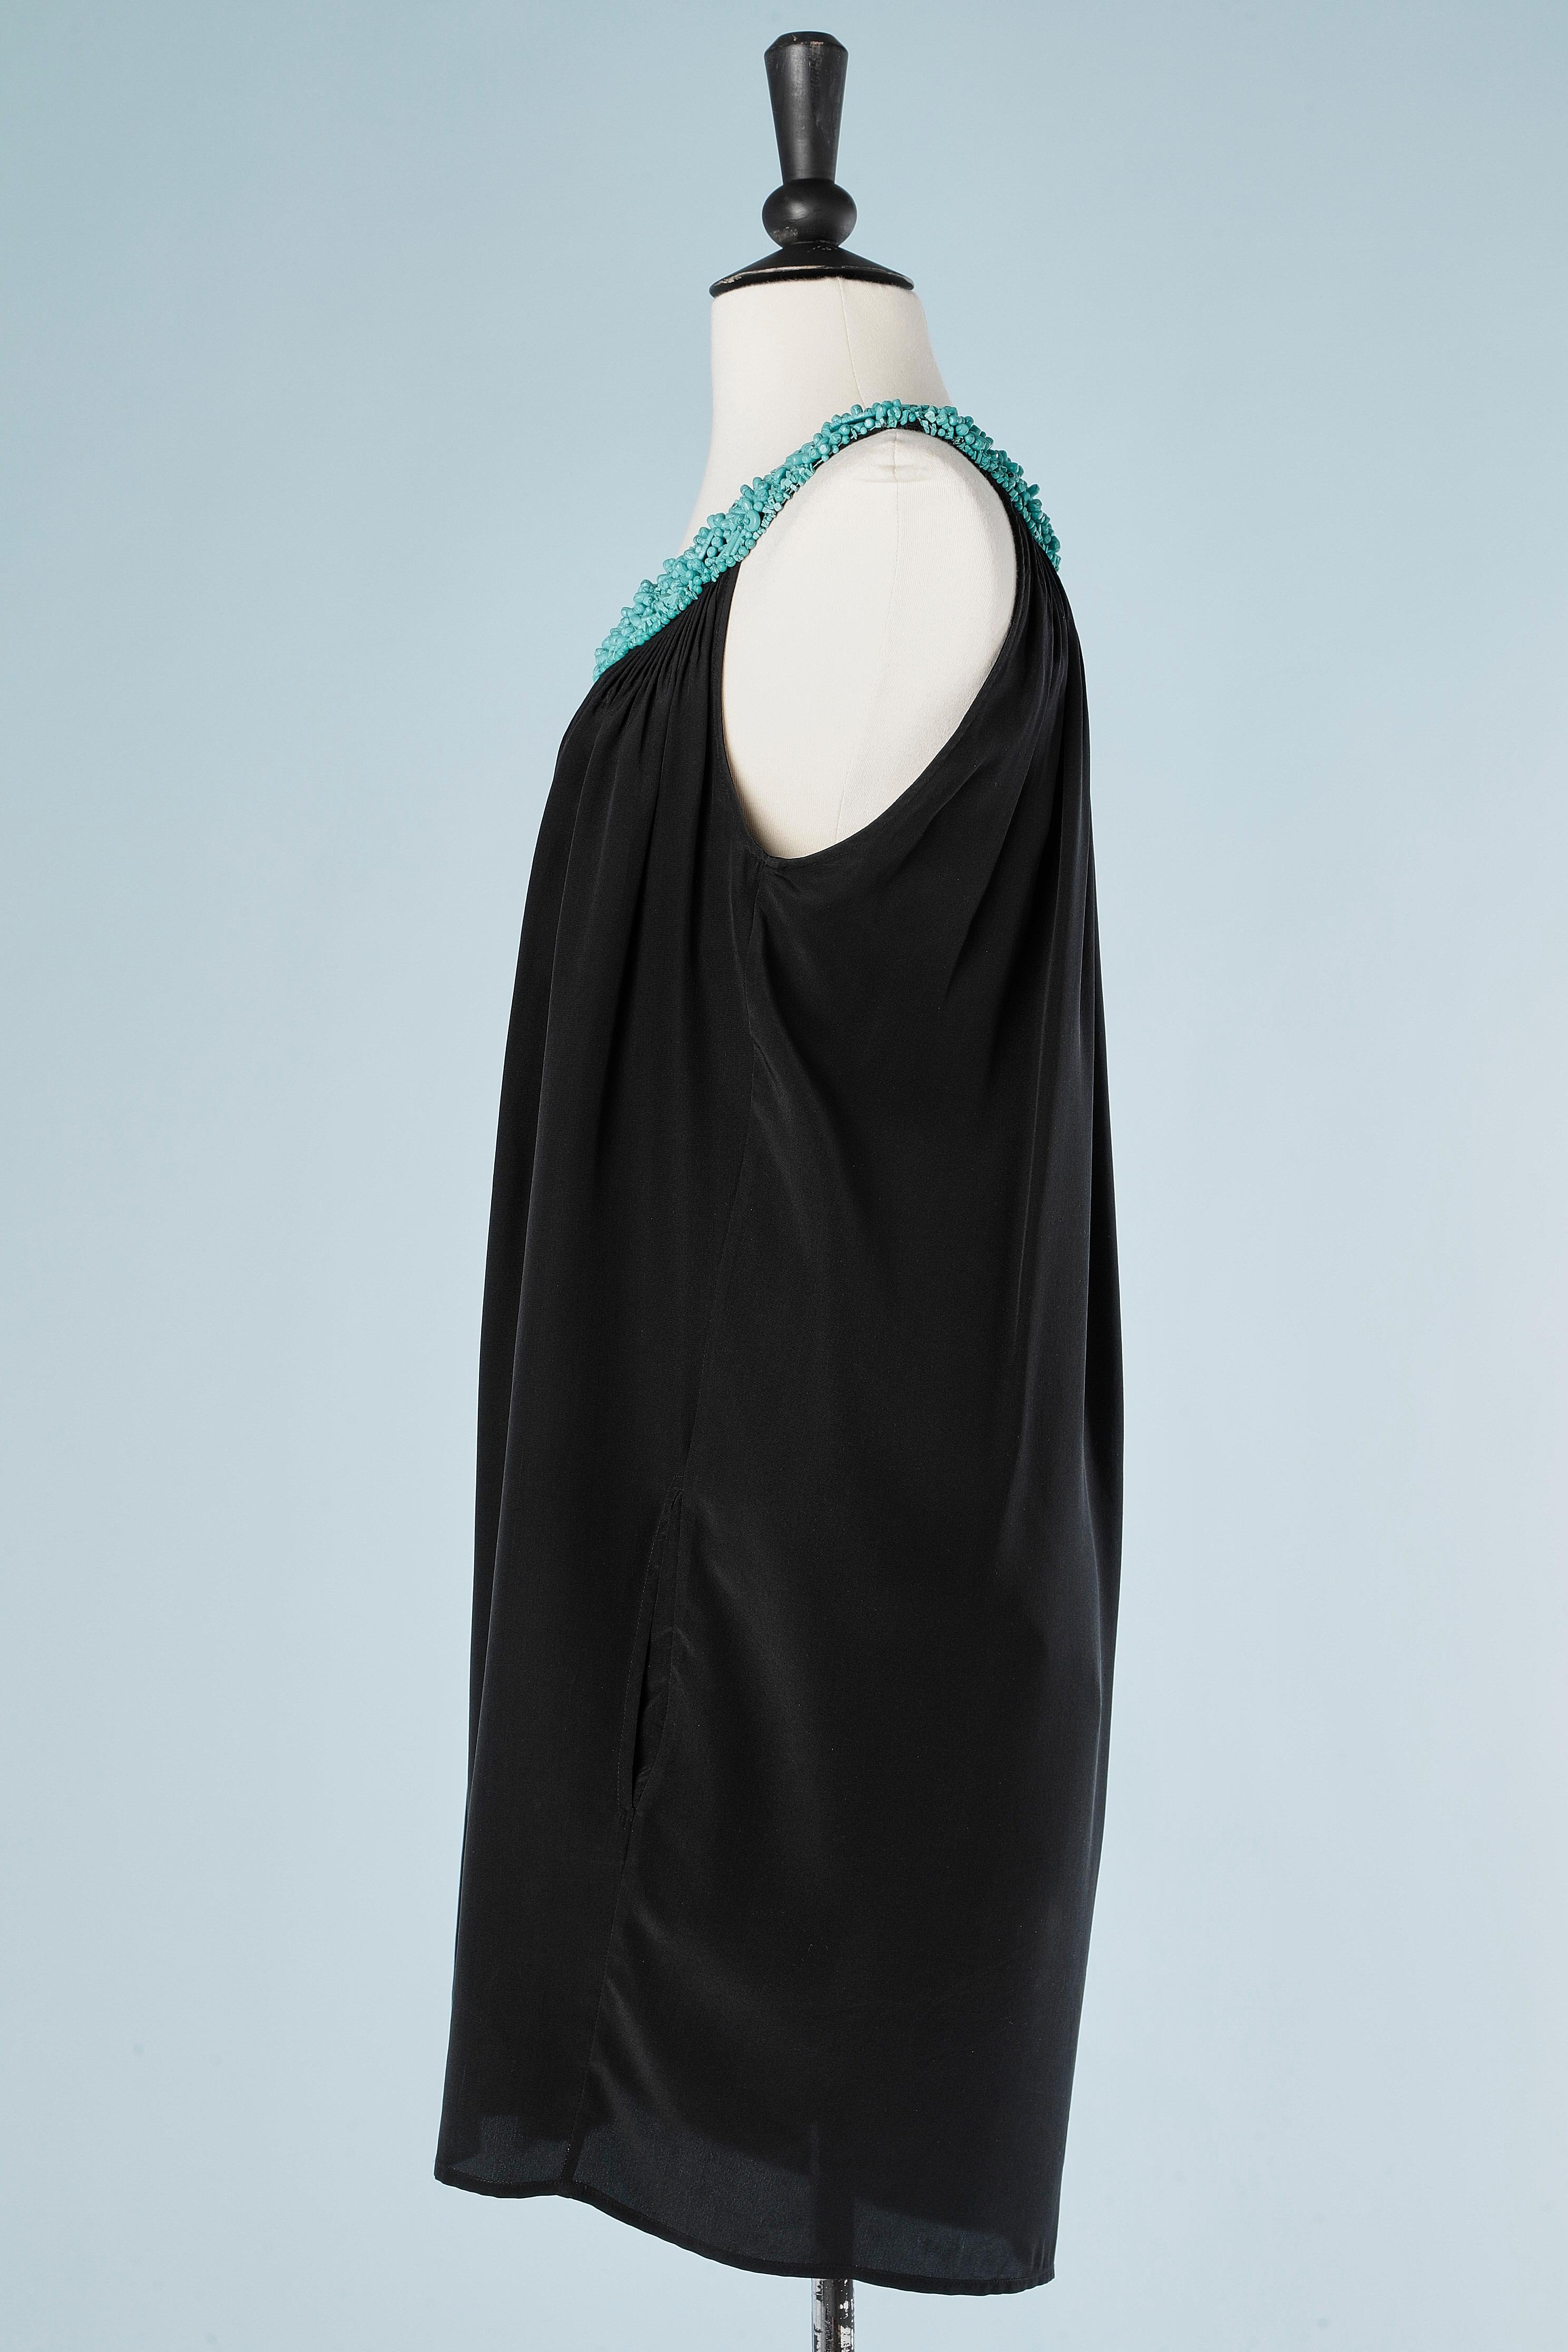 Women's Black cocktail dress with turquoise beaded neckline Moschino Cheap And Chic  For Sale